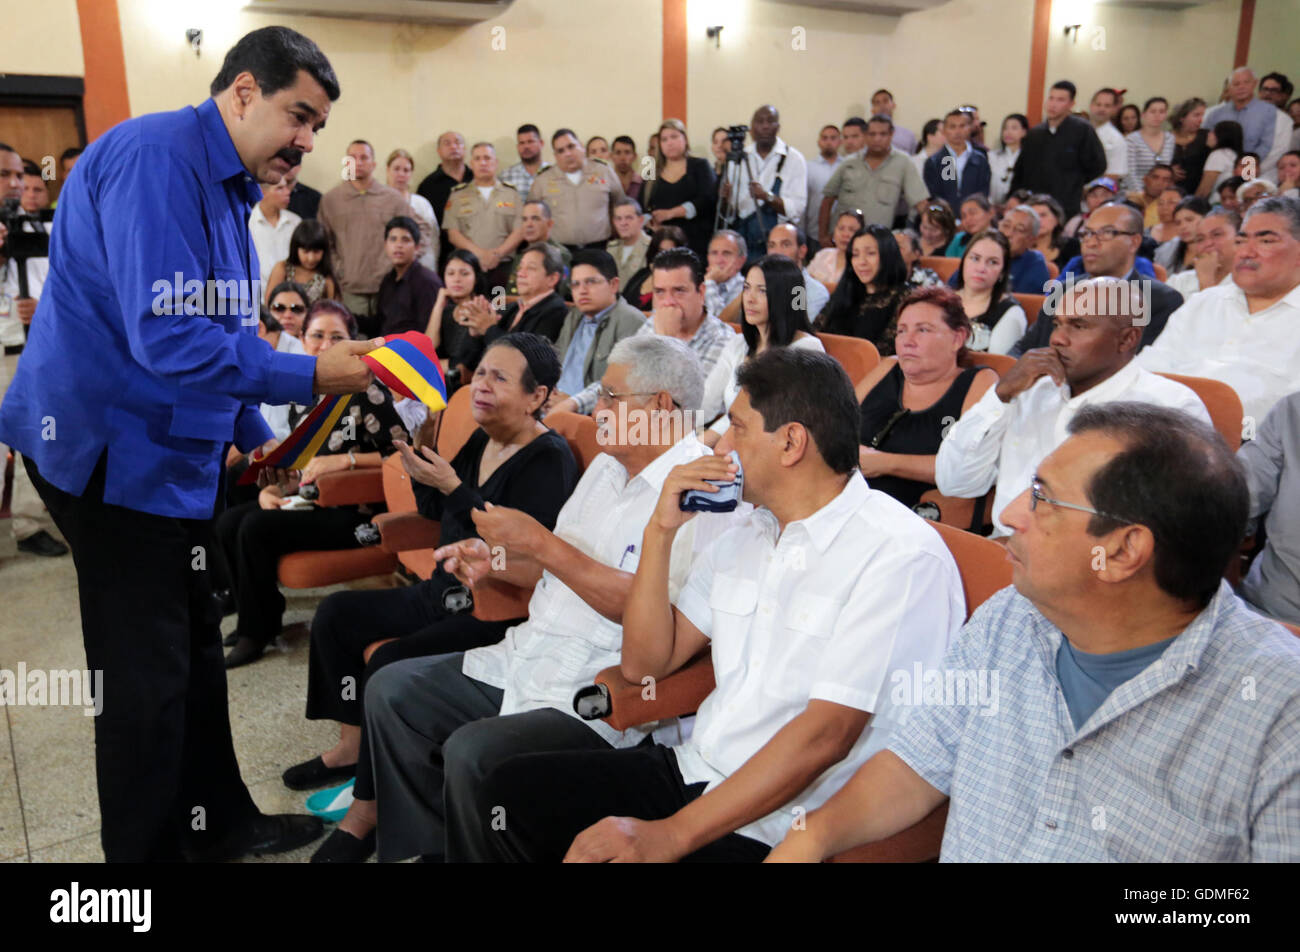 Barinas, Venezuela. 19th July, 2016. Image provided by the Venezuelan Presidency shows President Nicolas Maduro (R) interacting with relatives during the funeral of Anibal Chavez, brother of late Venezuelan President Hugo Chavez, at Casa del Alba, in Barinas, Venezuela, on July 19, 2016. Credit:  Venezuela's Presidency/Xinhua/Alamy Live News Stock Photo